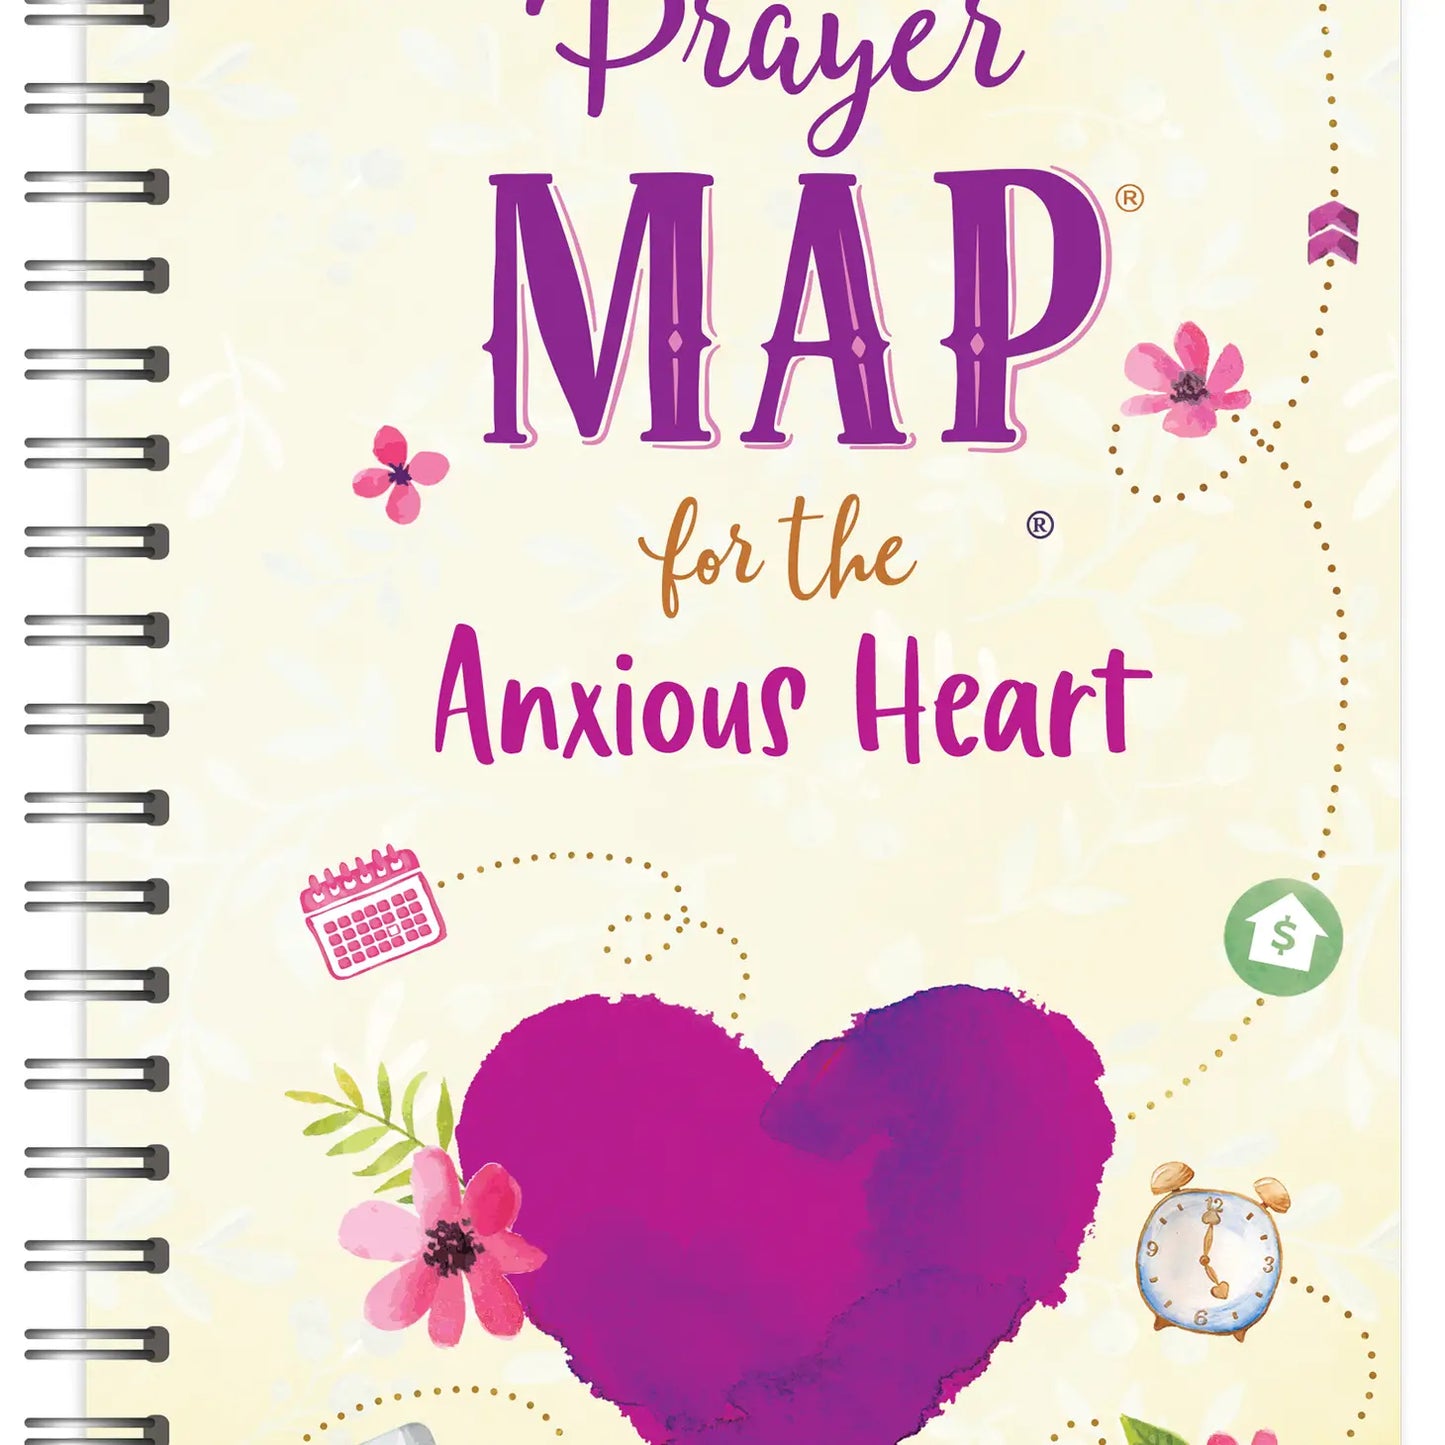 The Prayer Map® For the Anxious Heart